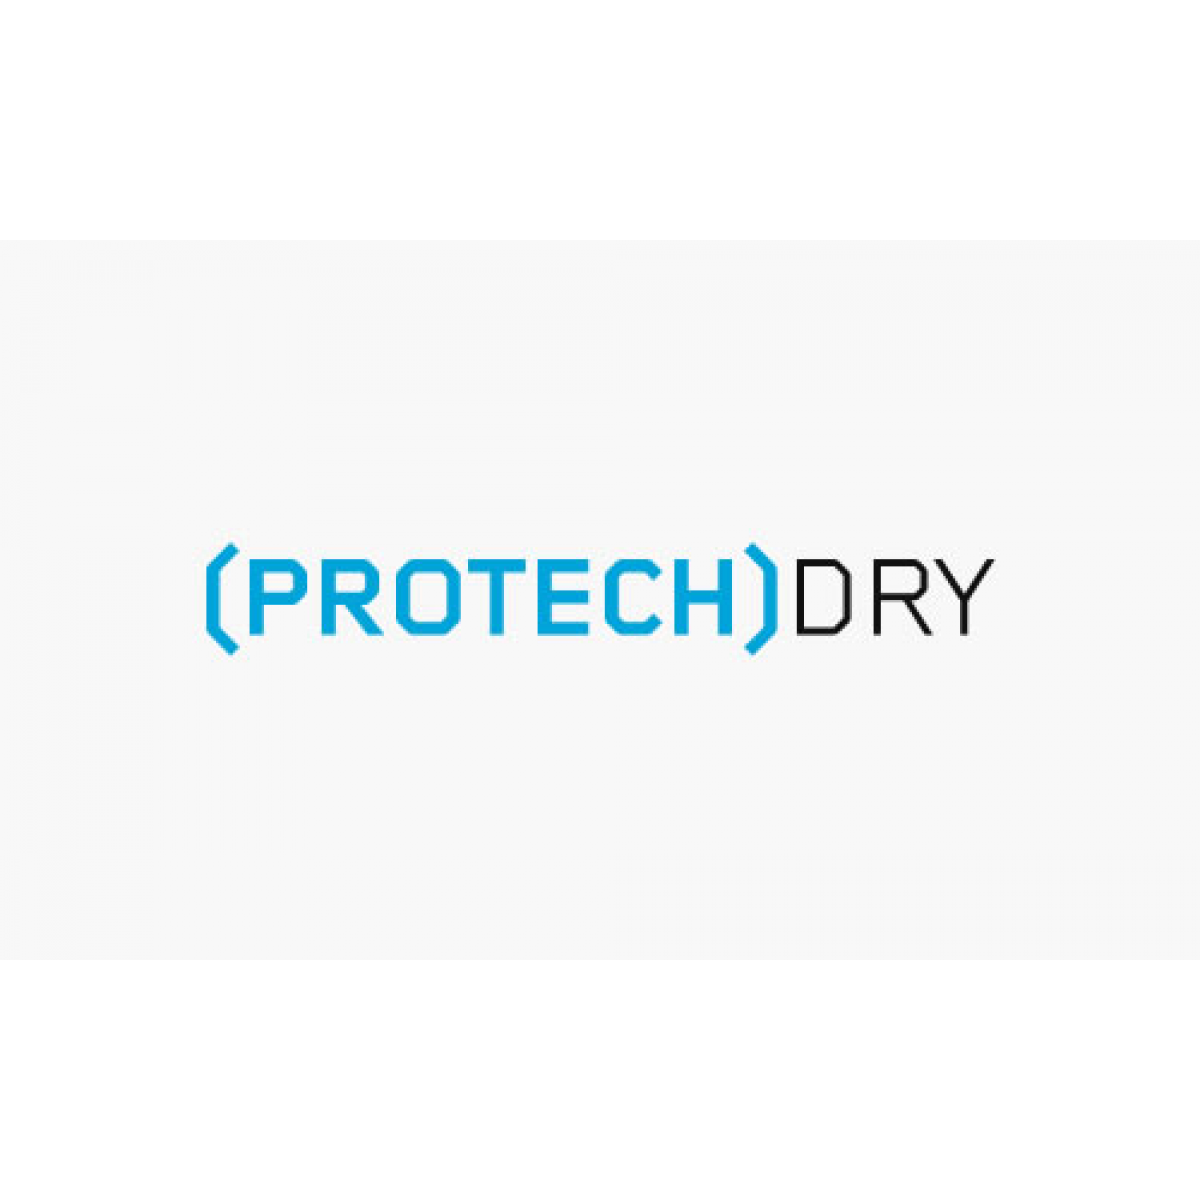 Protech Dry Graphite Lubricant 150g - Haydn